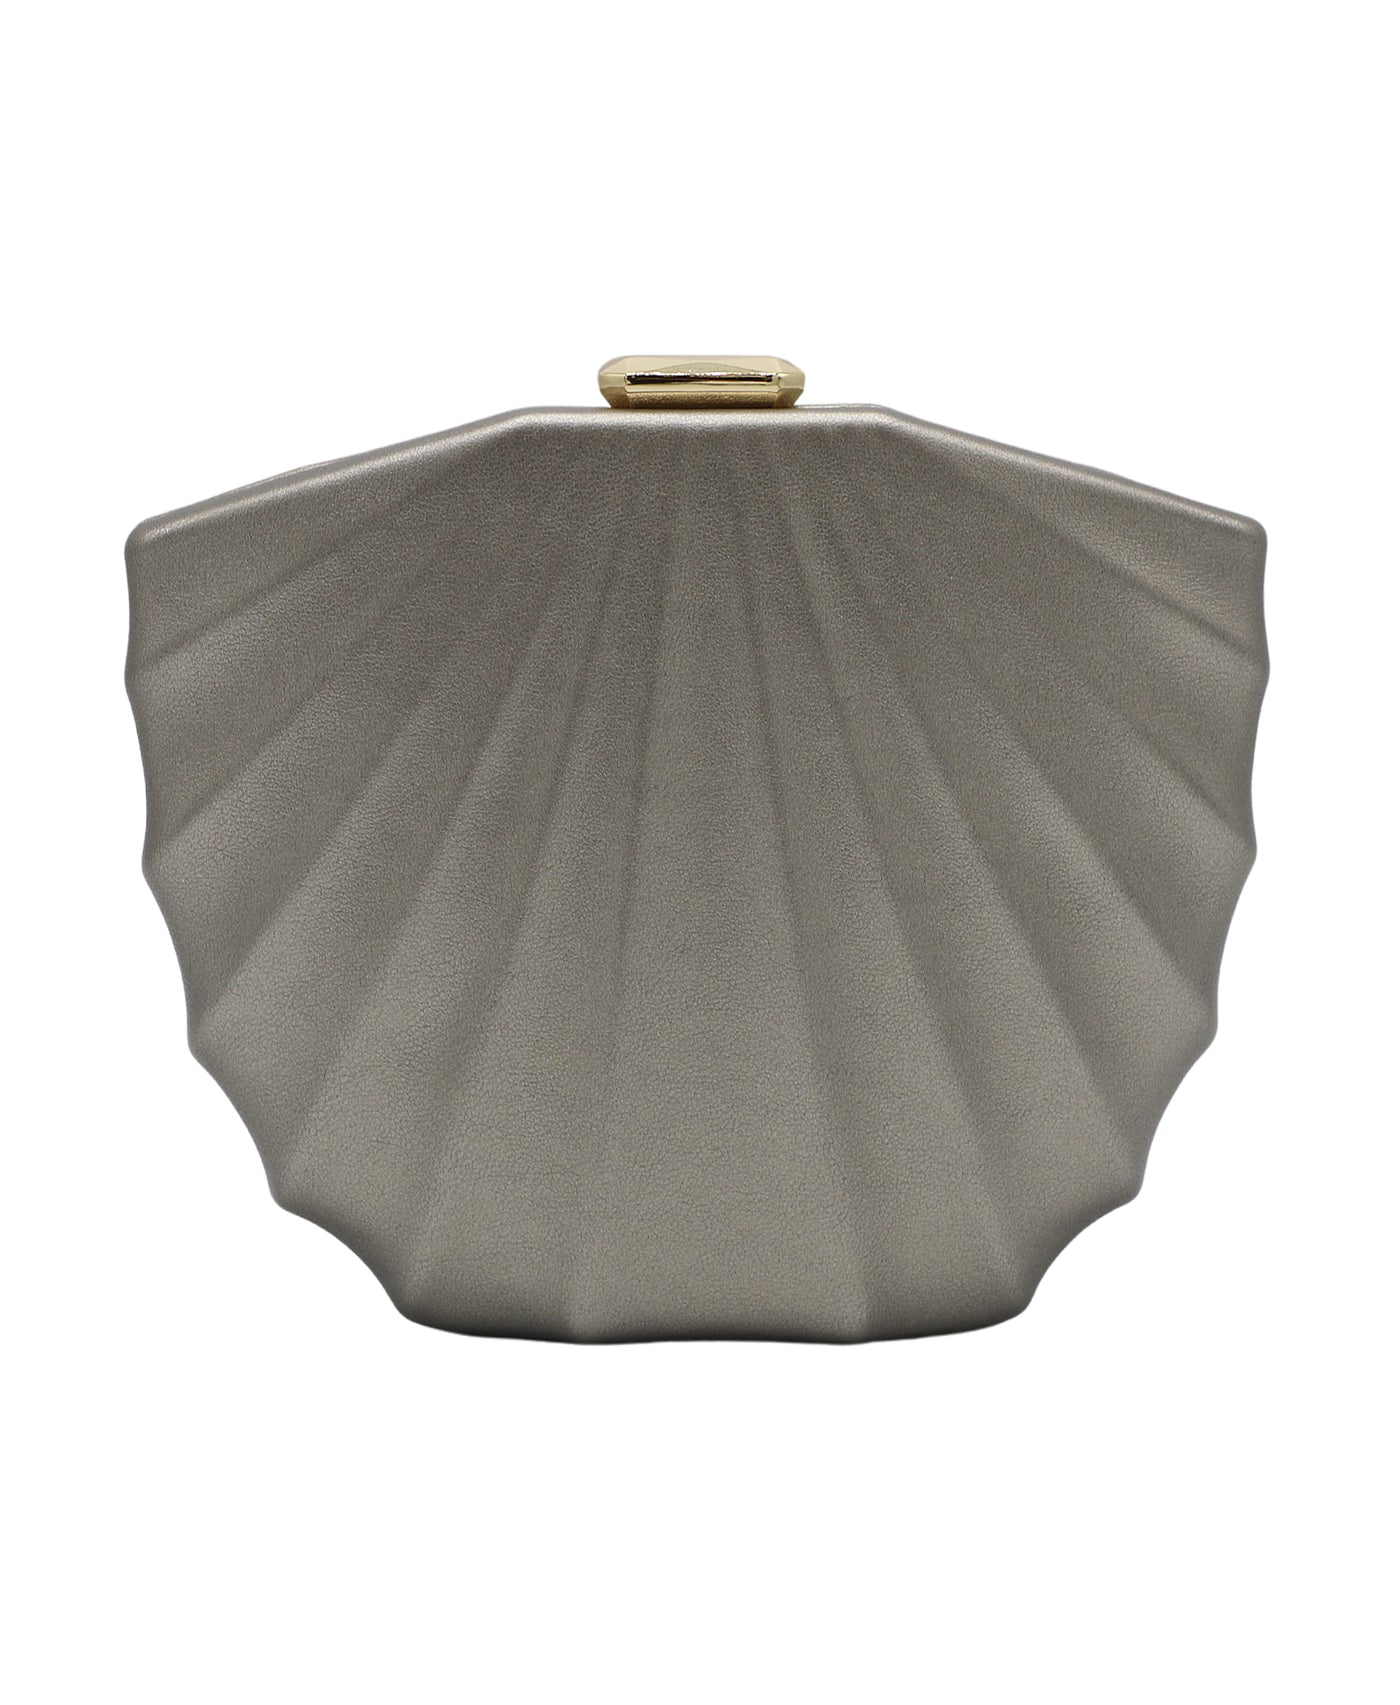 Faux Leather Hard Case Shell Clutch image 1